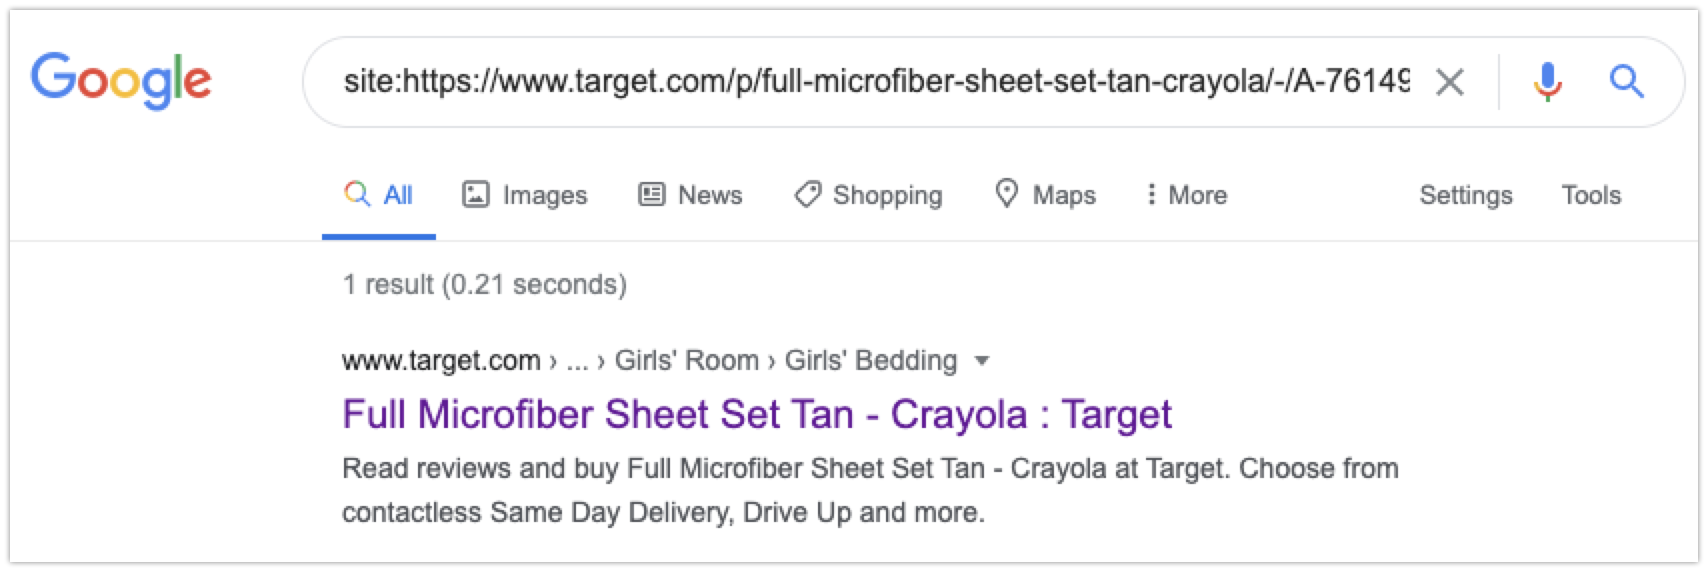 The URL that's indexed by Google shows up in the search results